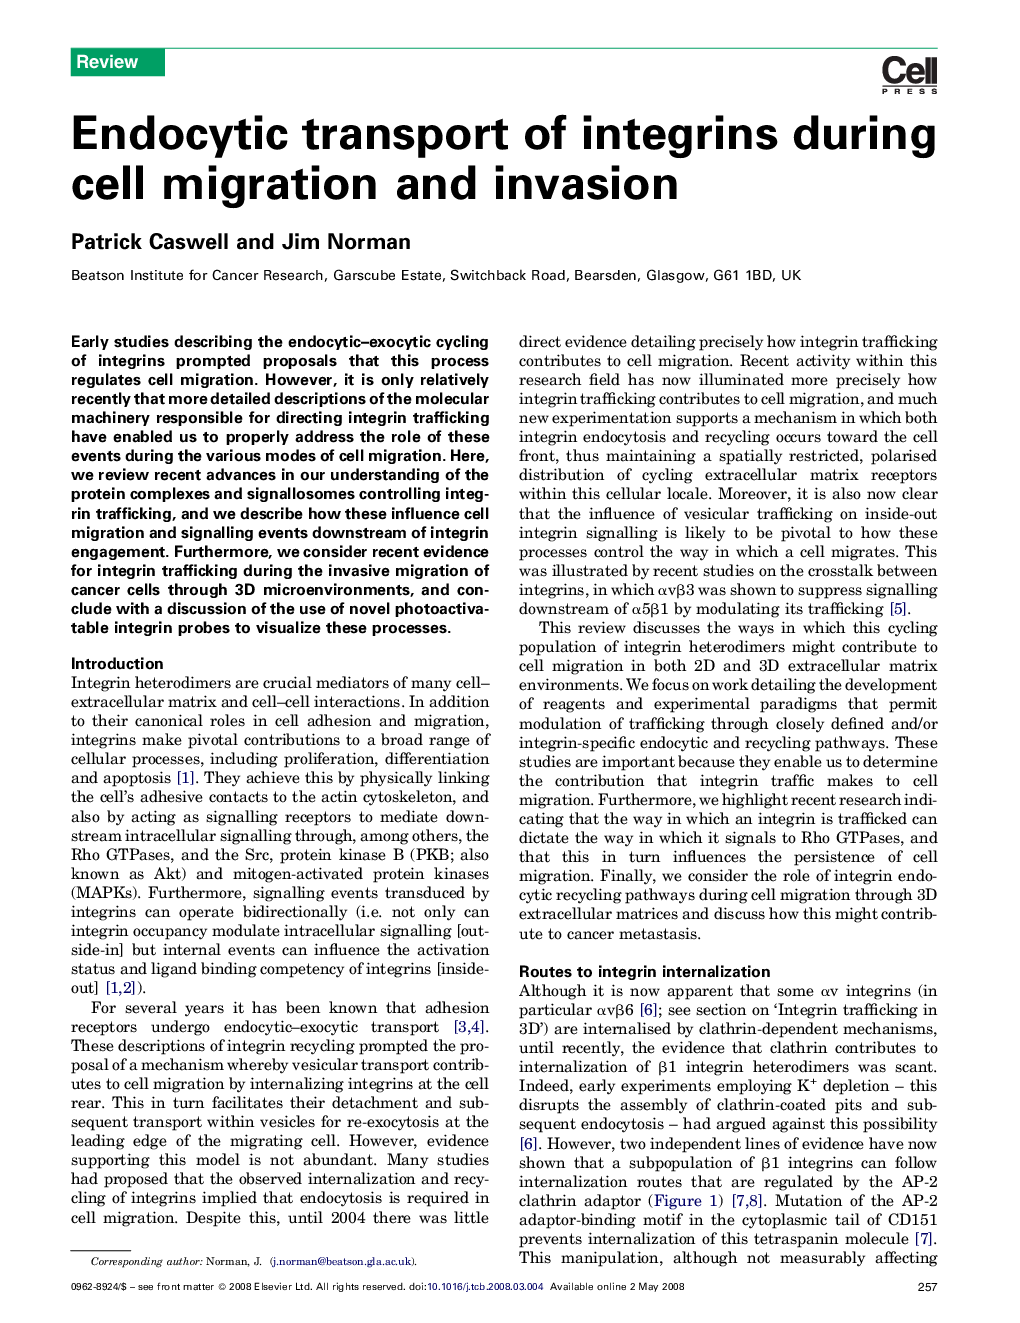 Endocytic transport of integrins during cell migration and invasion